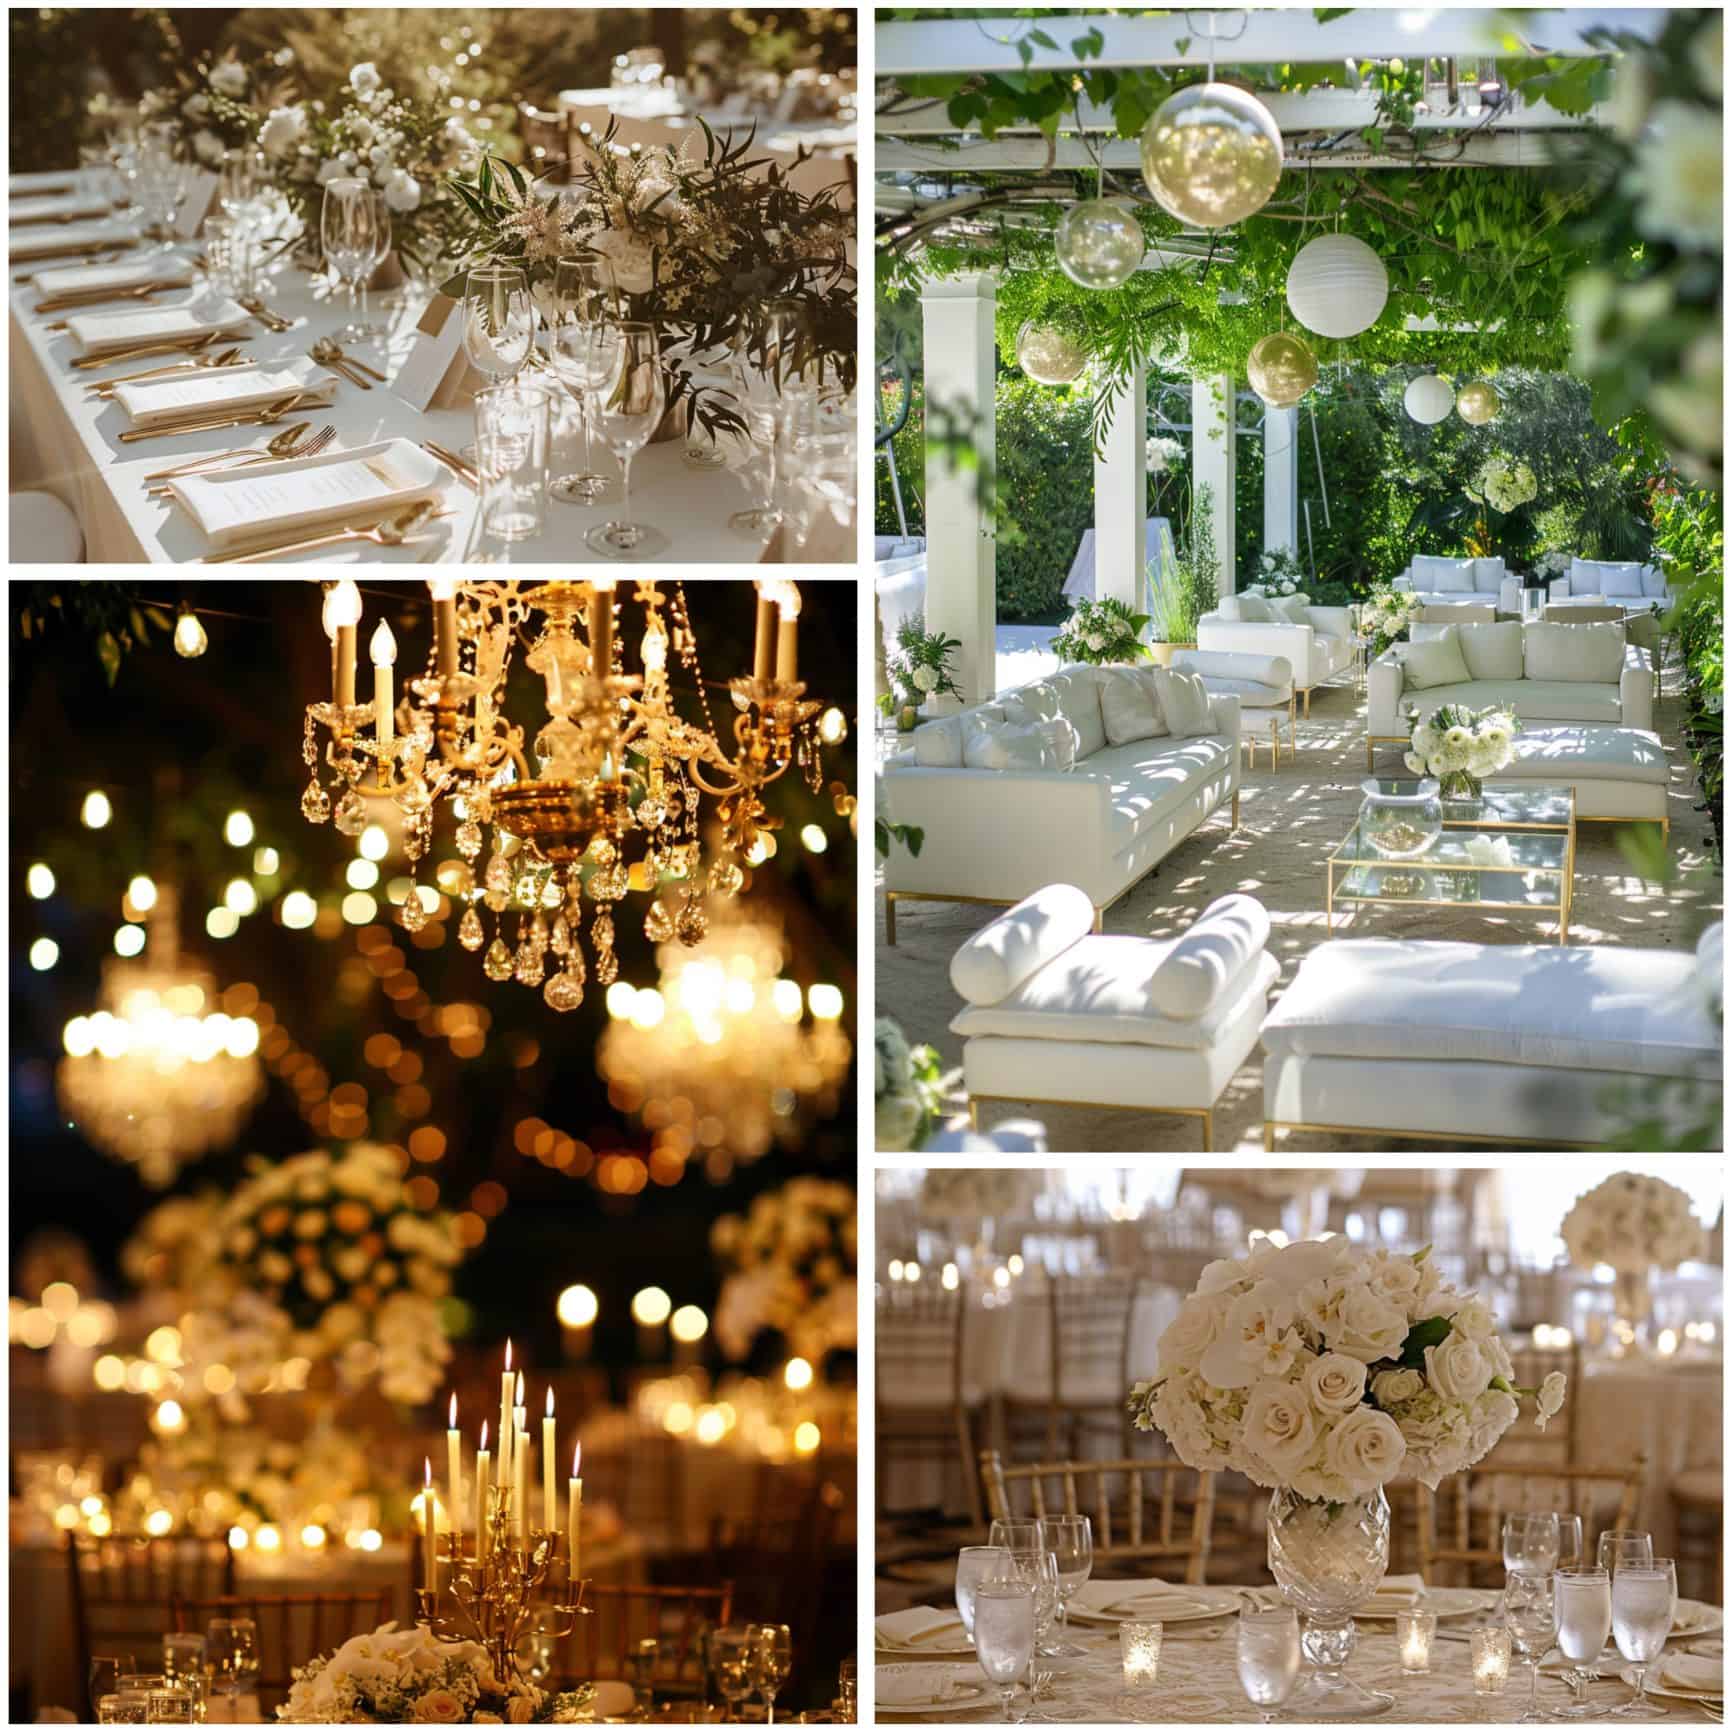 white and gold wedding theme ideas for daytime and nighttime